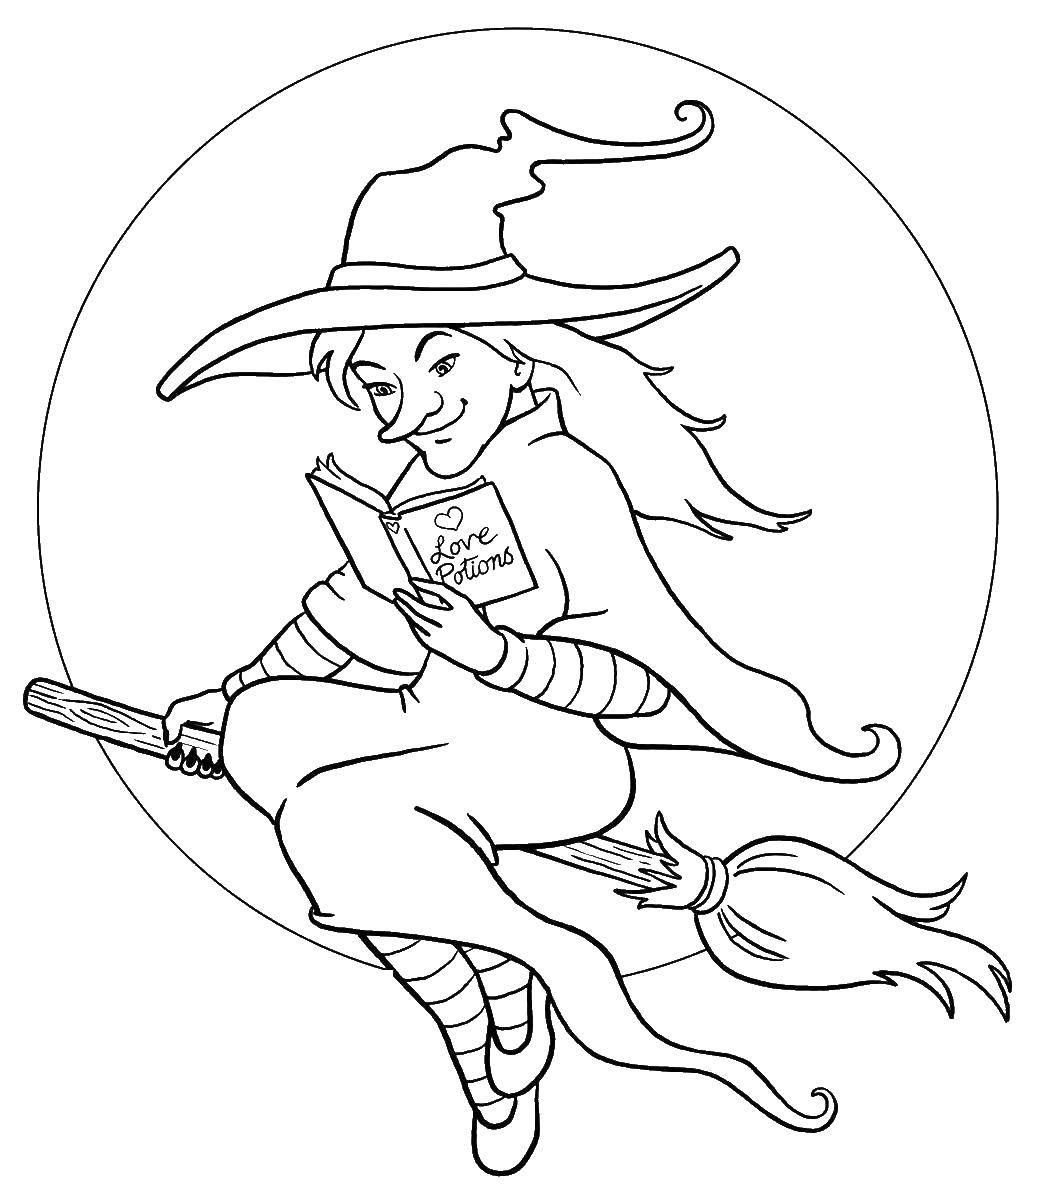 Coloring Witch on a broom. Category that old woman. Tags:  that old woman, witch, broom.